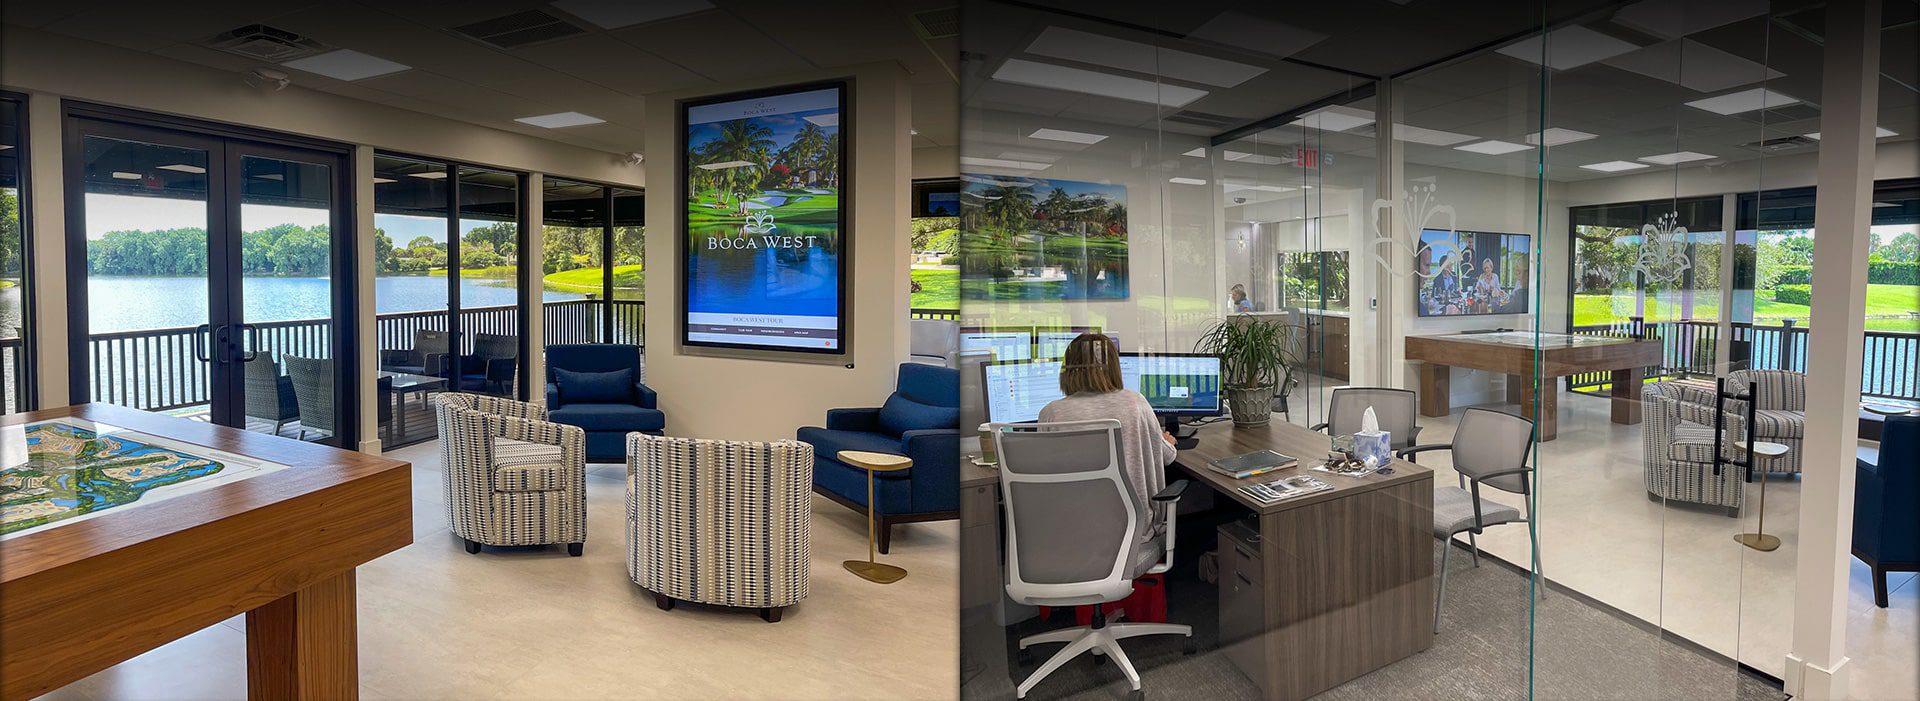 Interior of the Boca West Realty Office